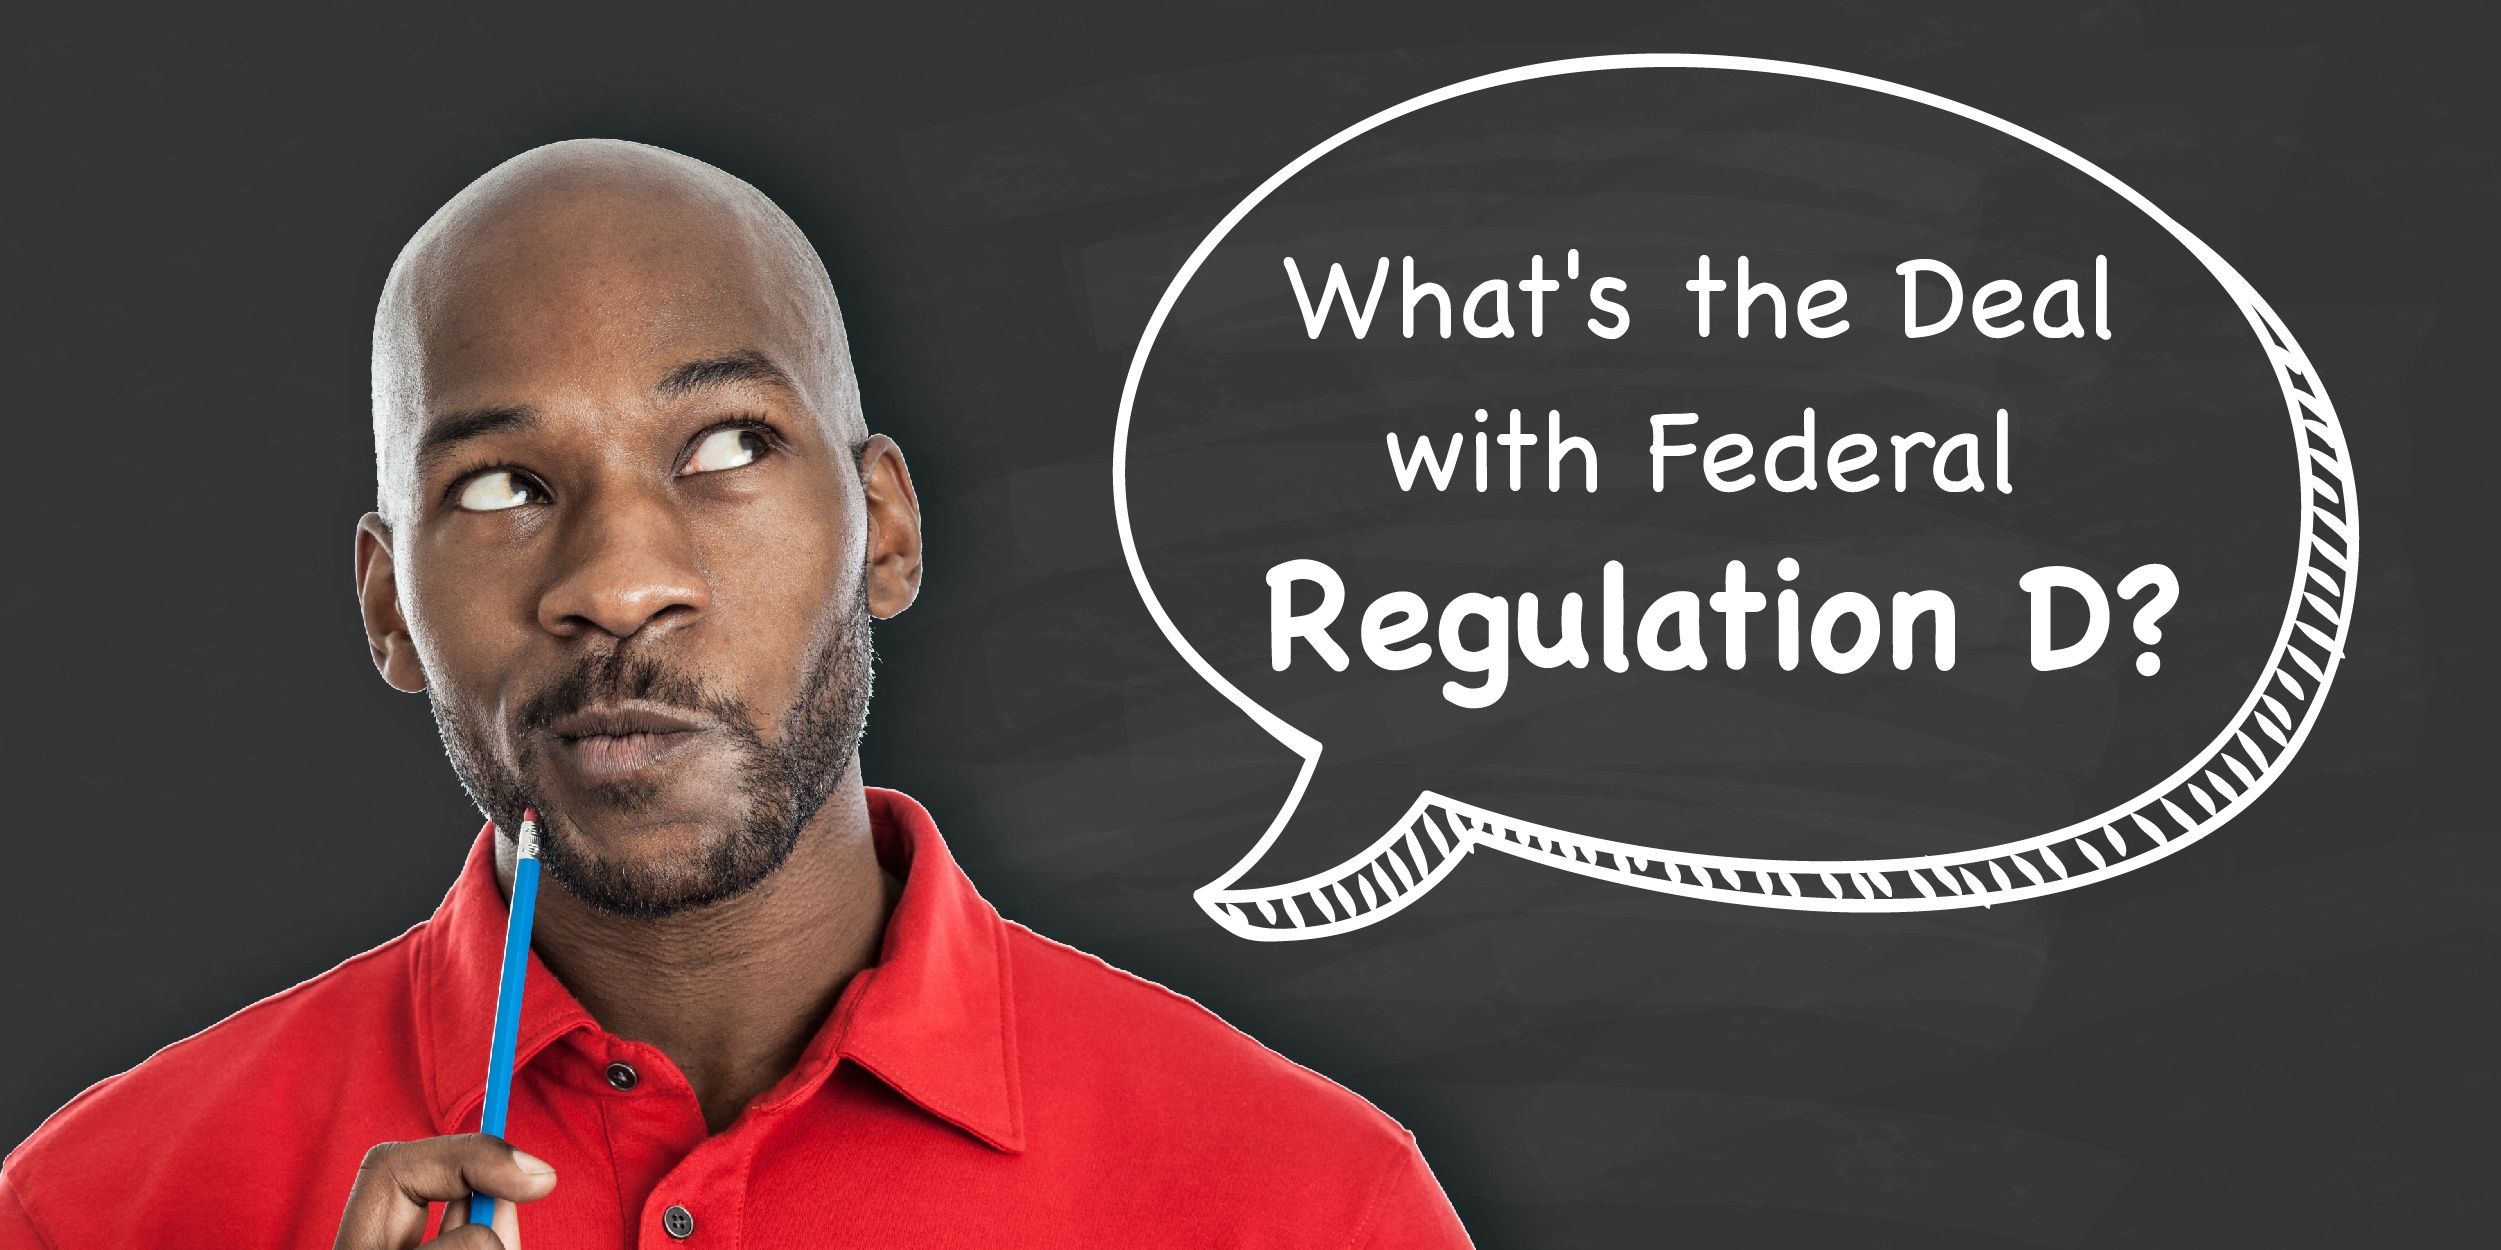 What's the deal with Federal Regulation D?